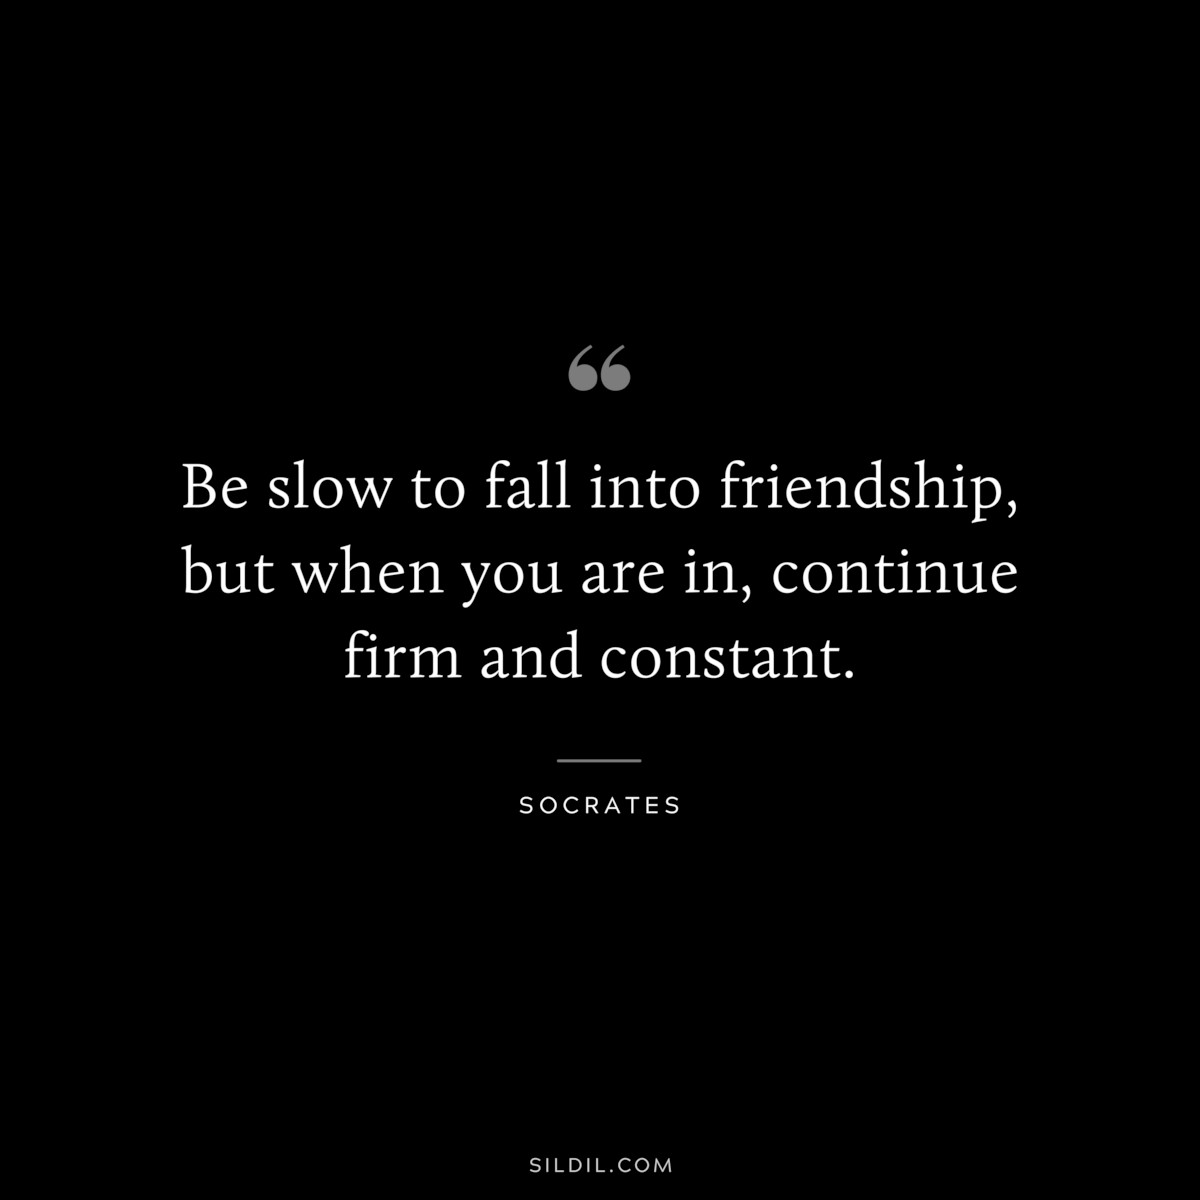 Be slow to fall into friendship, but when you are in, continue firm and constant. ― Socrates